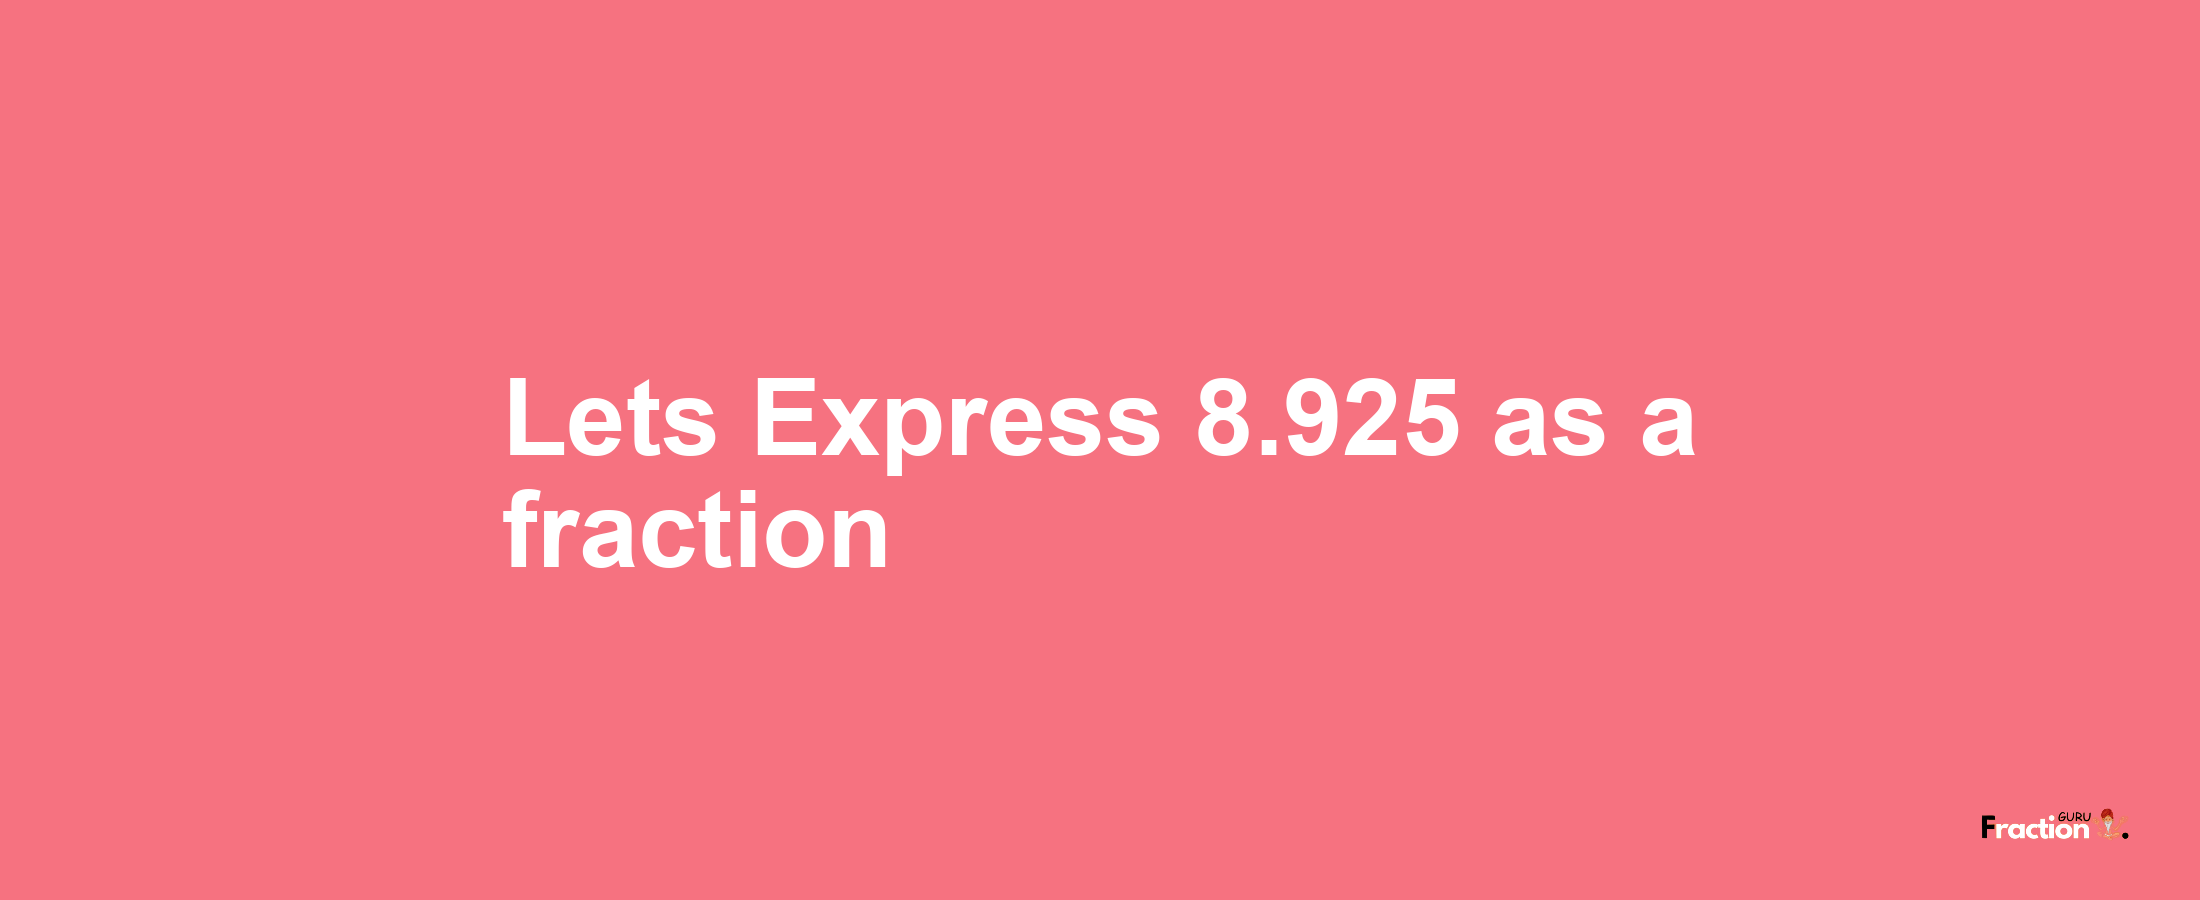 Lets Express 8.925 as afraction